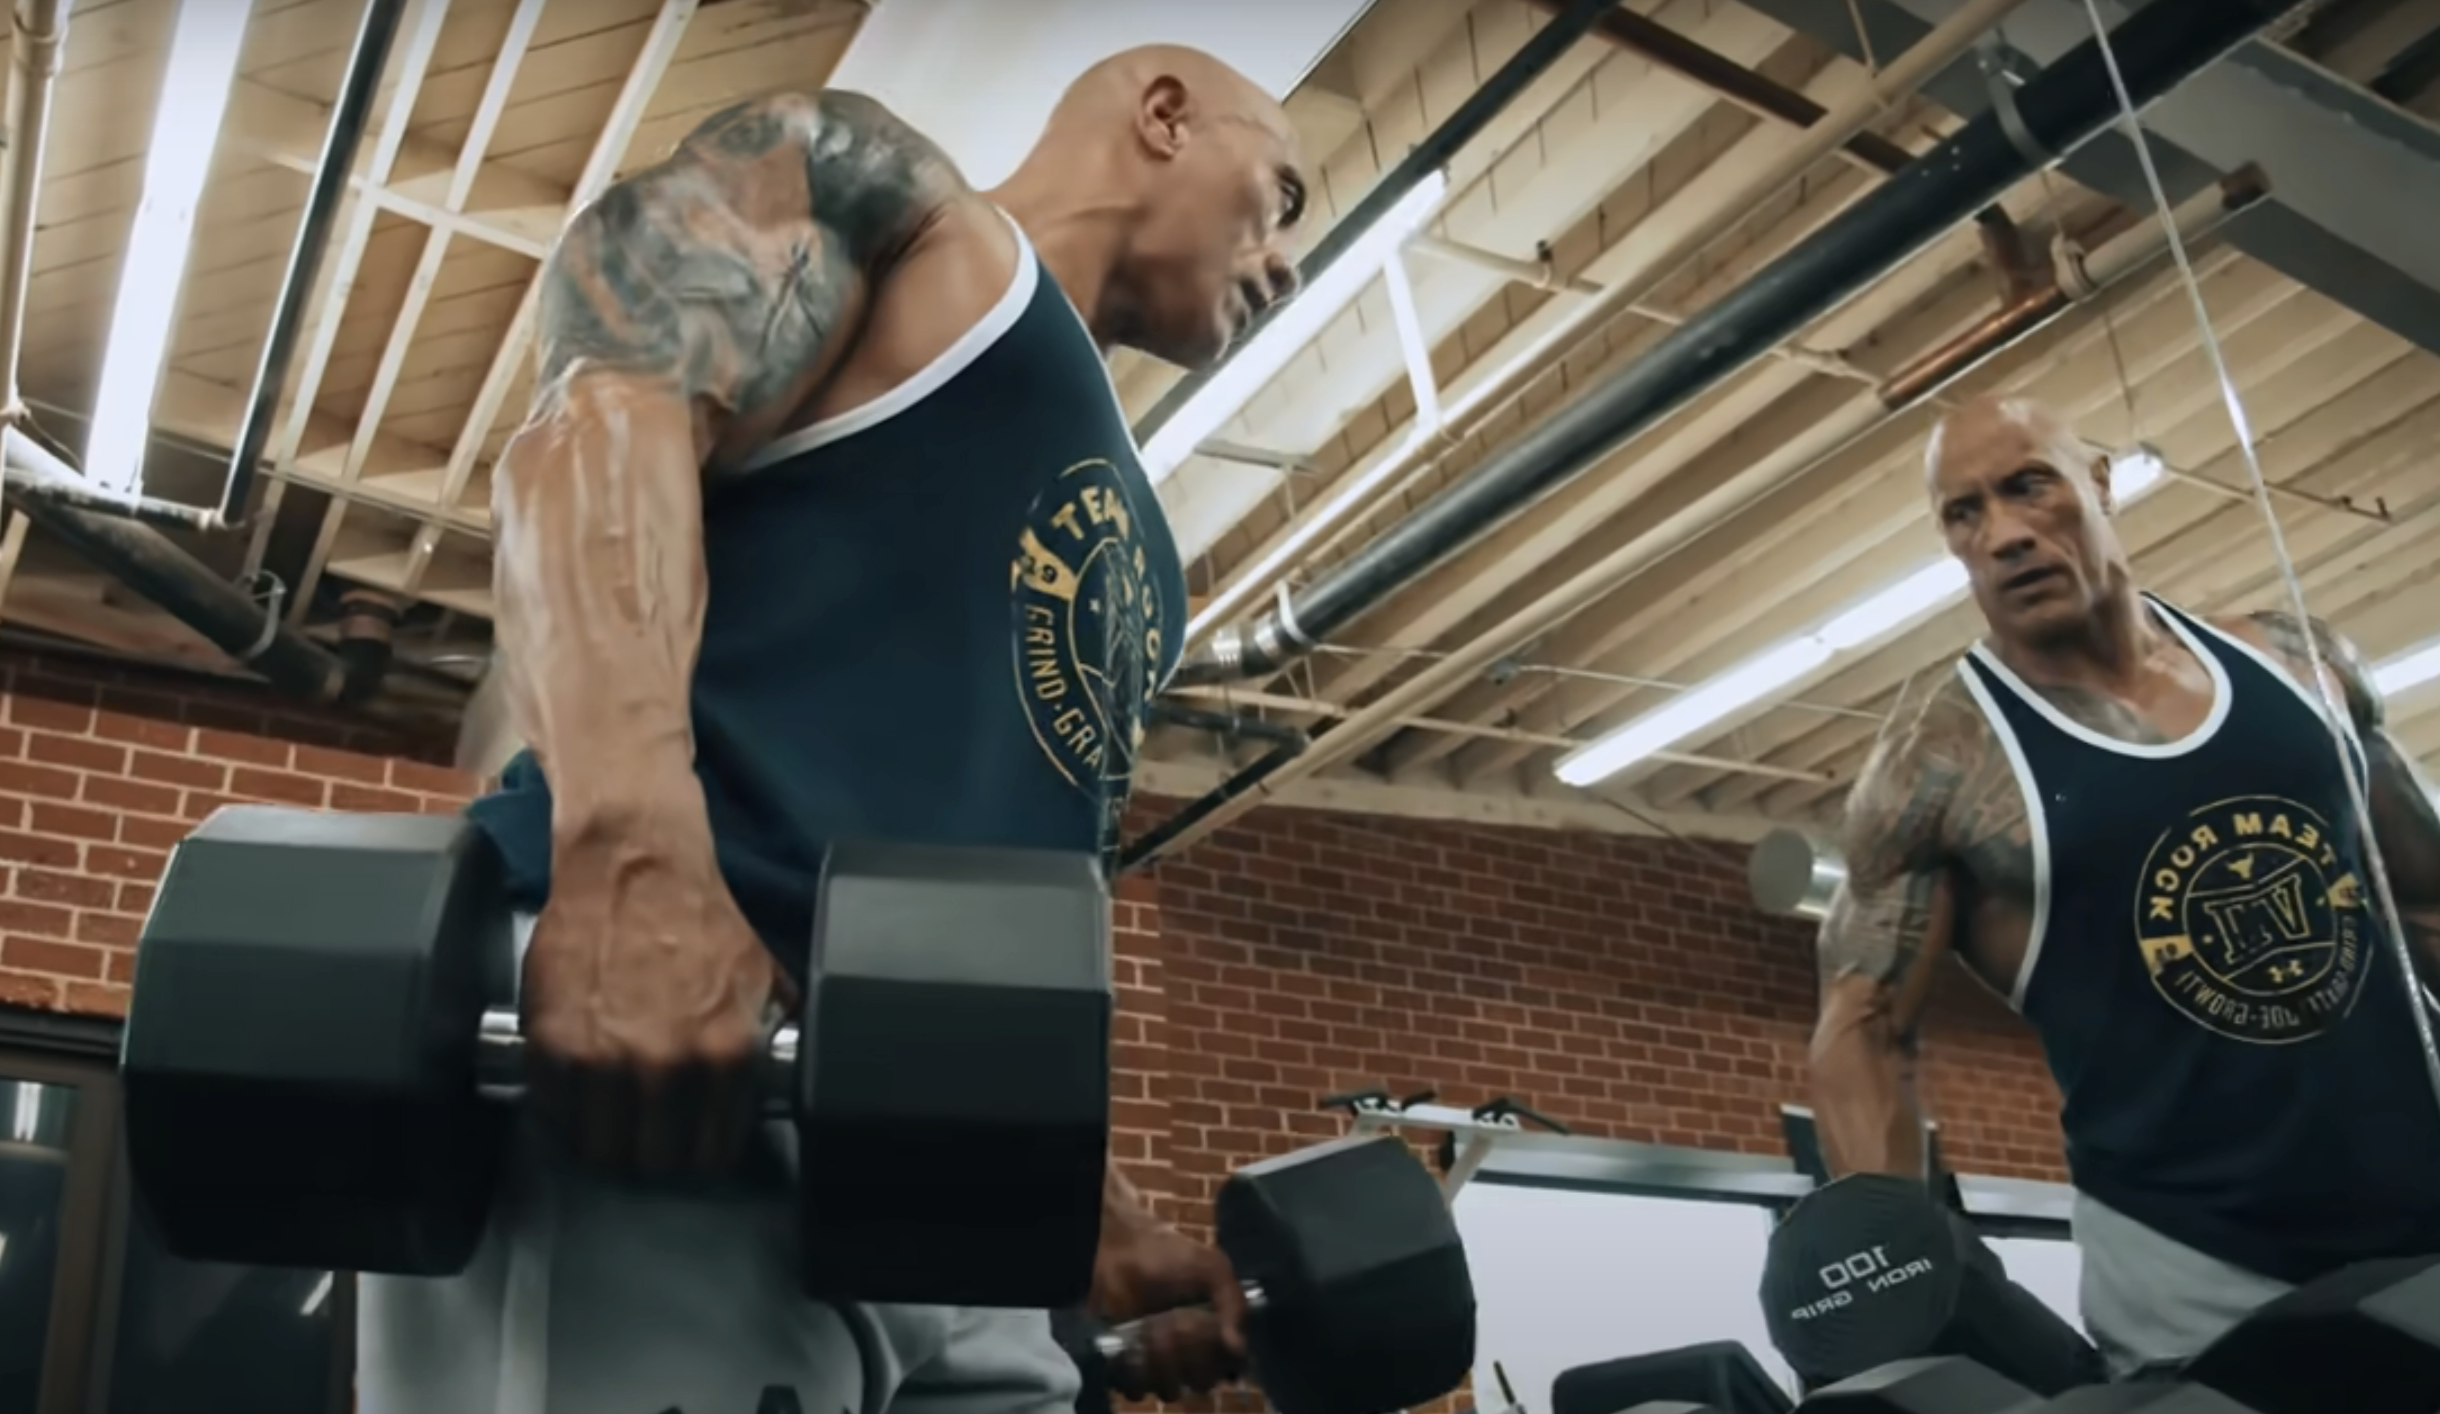 Dwayne Johnson lifting weights in a gym, reflecting focus and determination for fitness